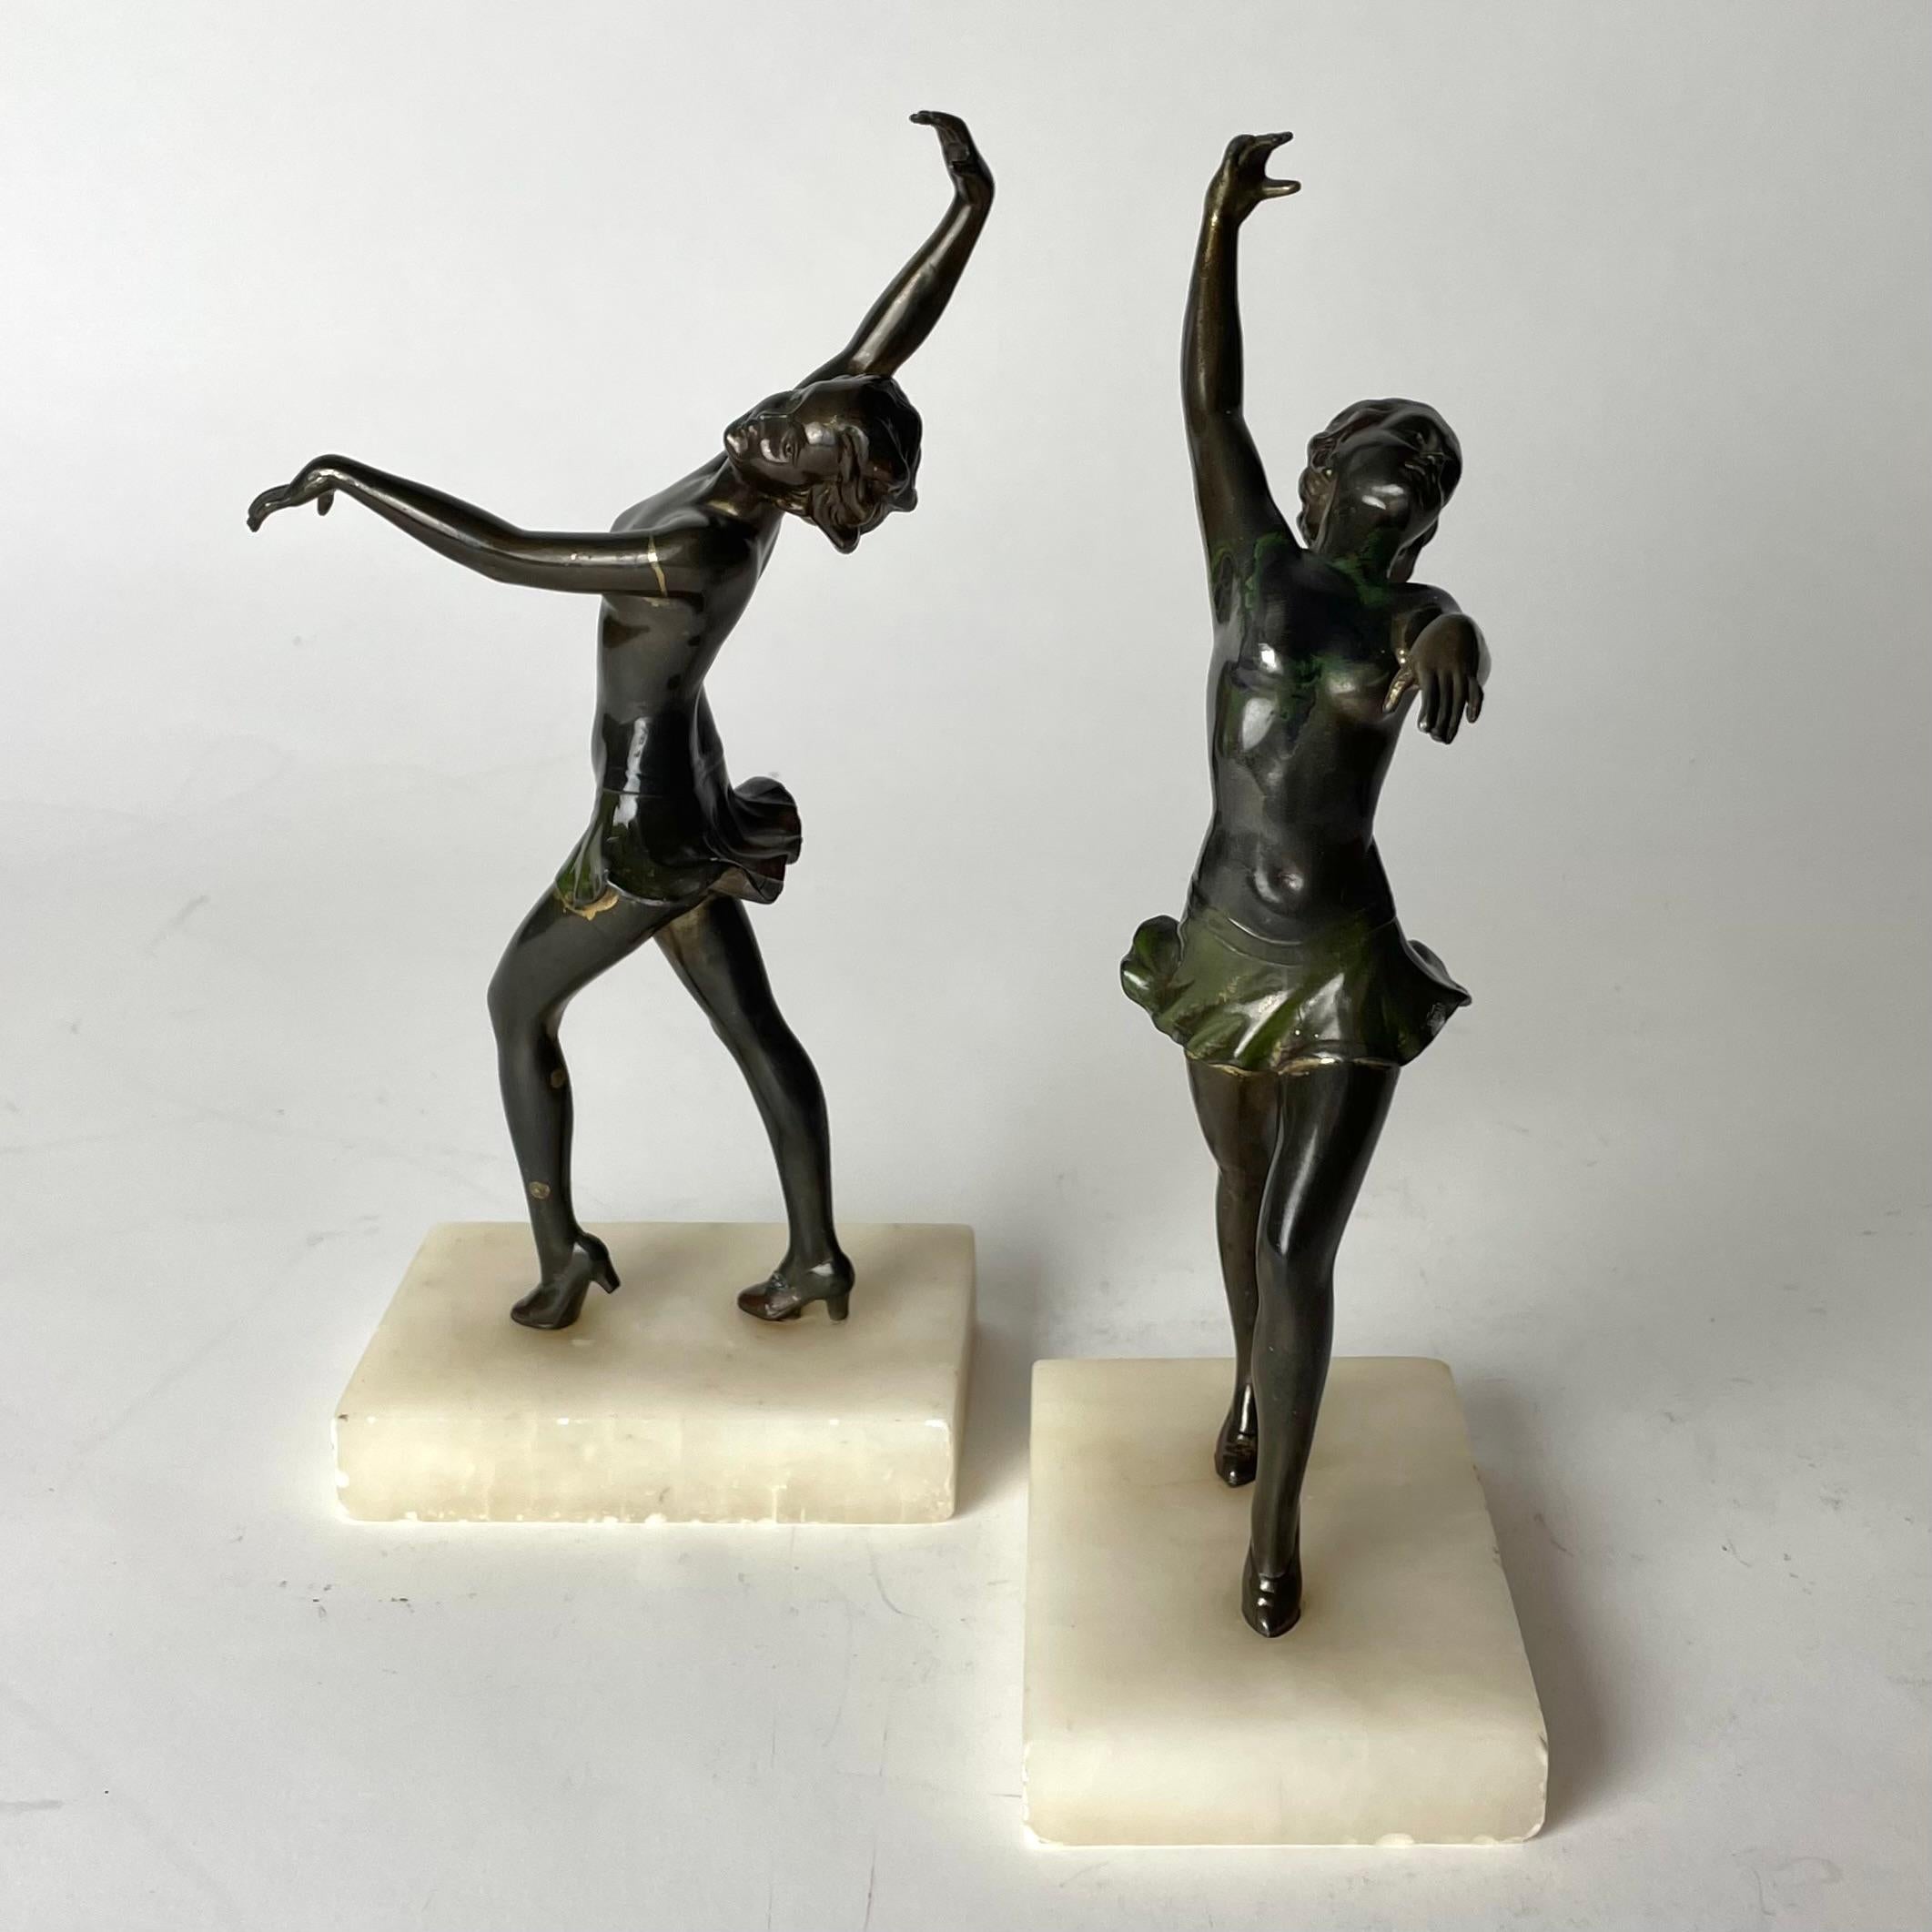 Early 20th Century A pair of period Art Deco Bookends from 1920s-1930s with dancing women.